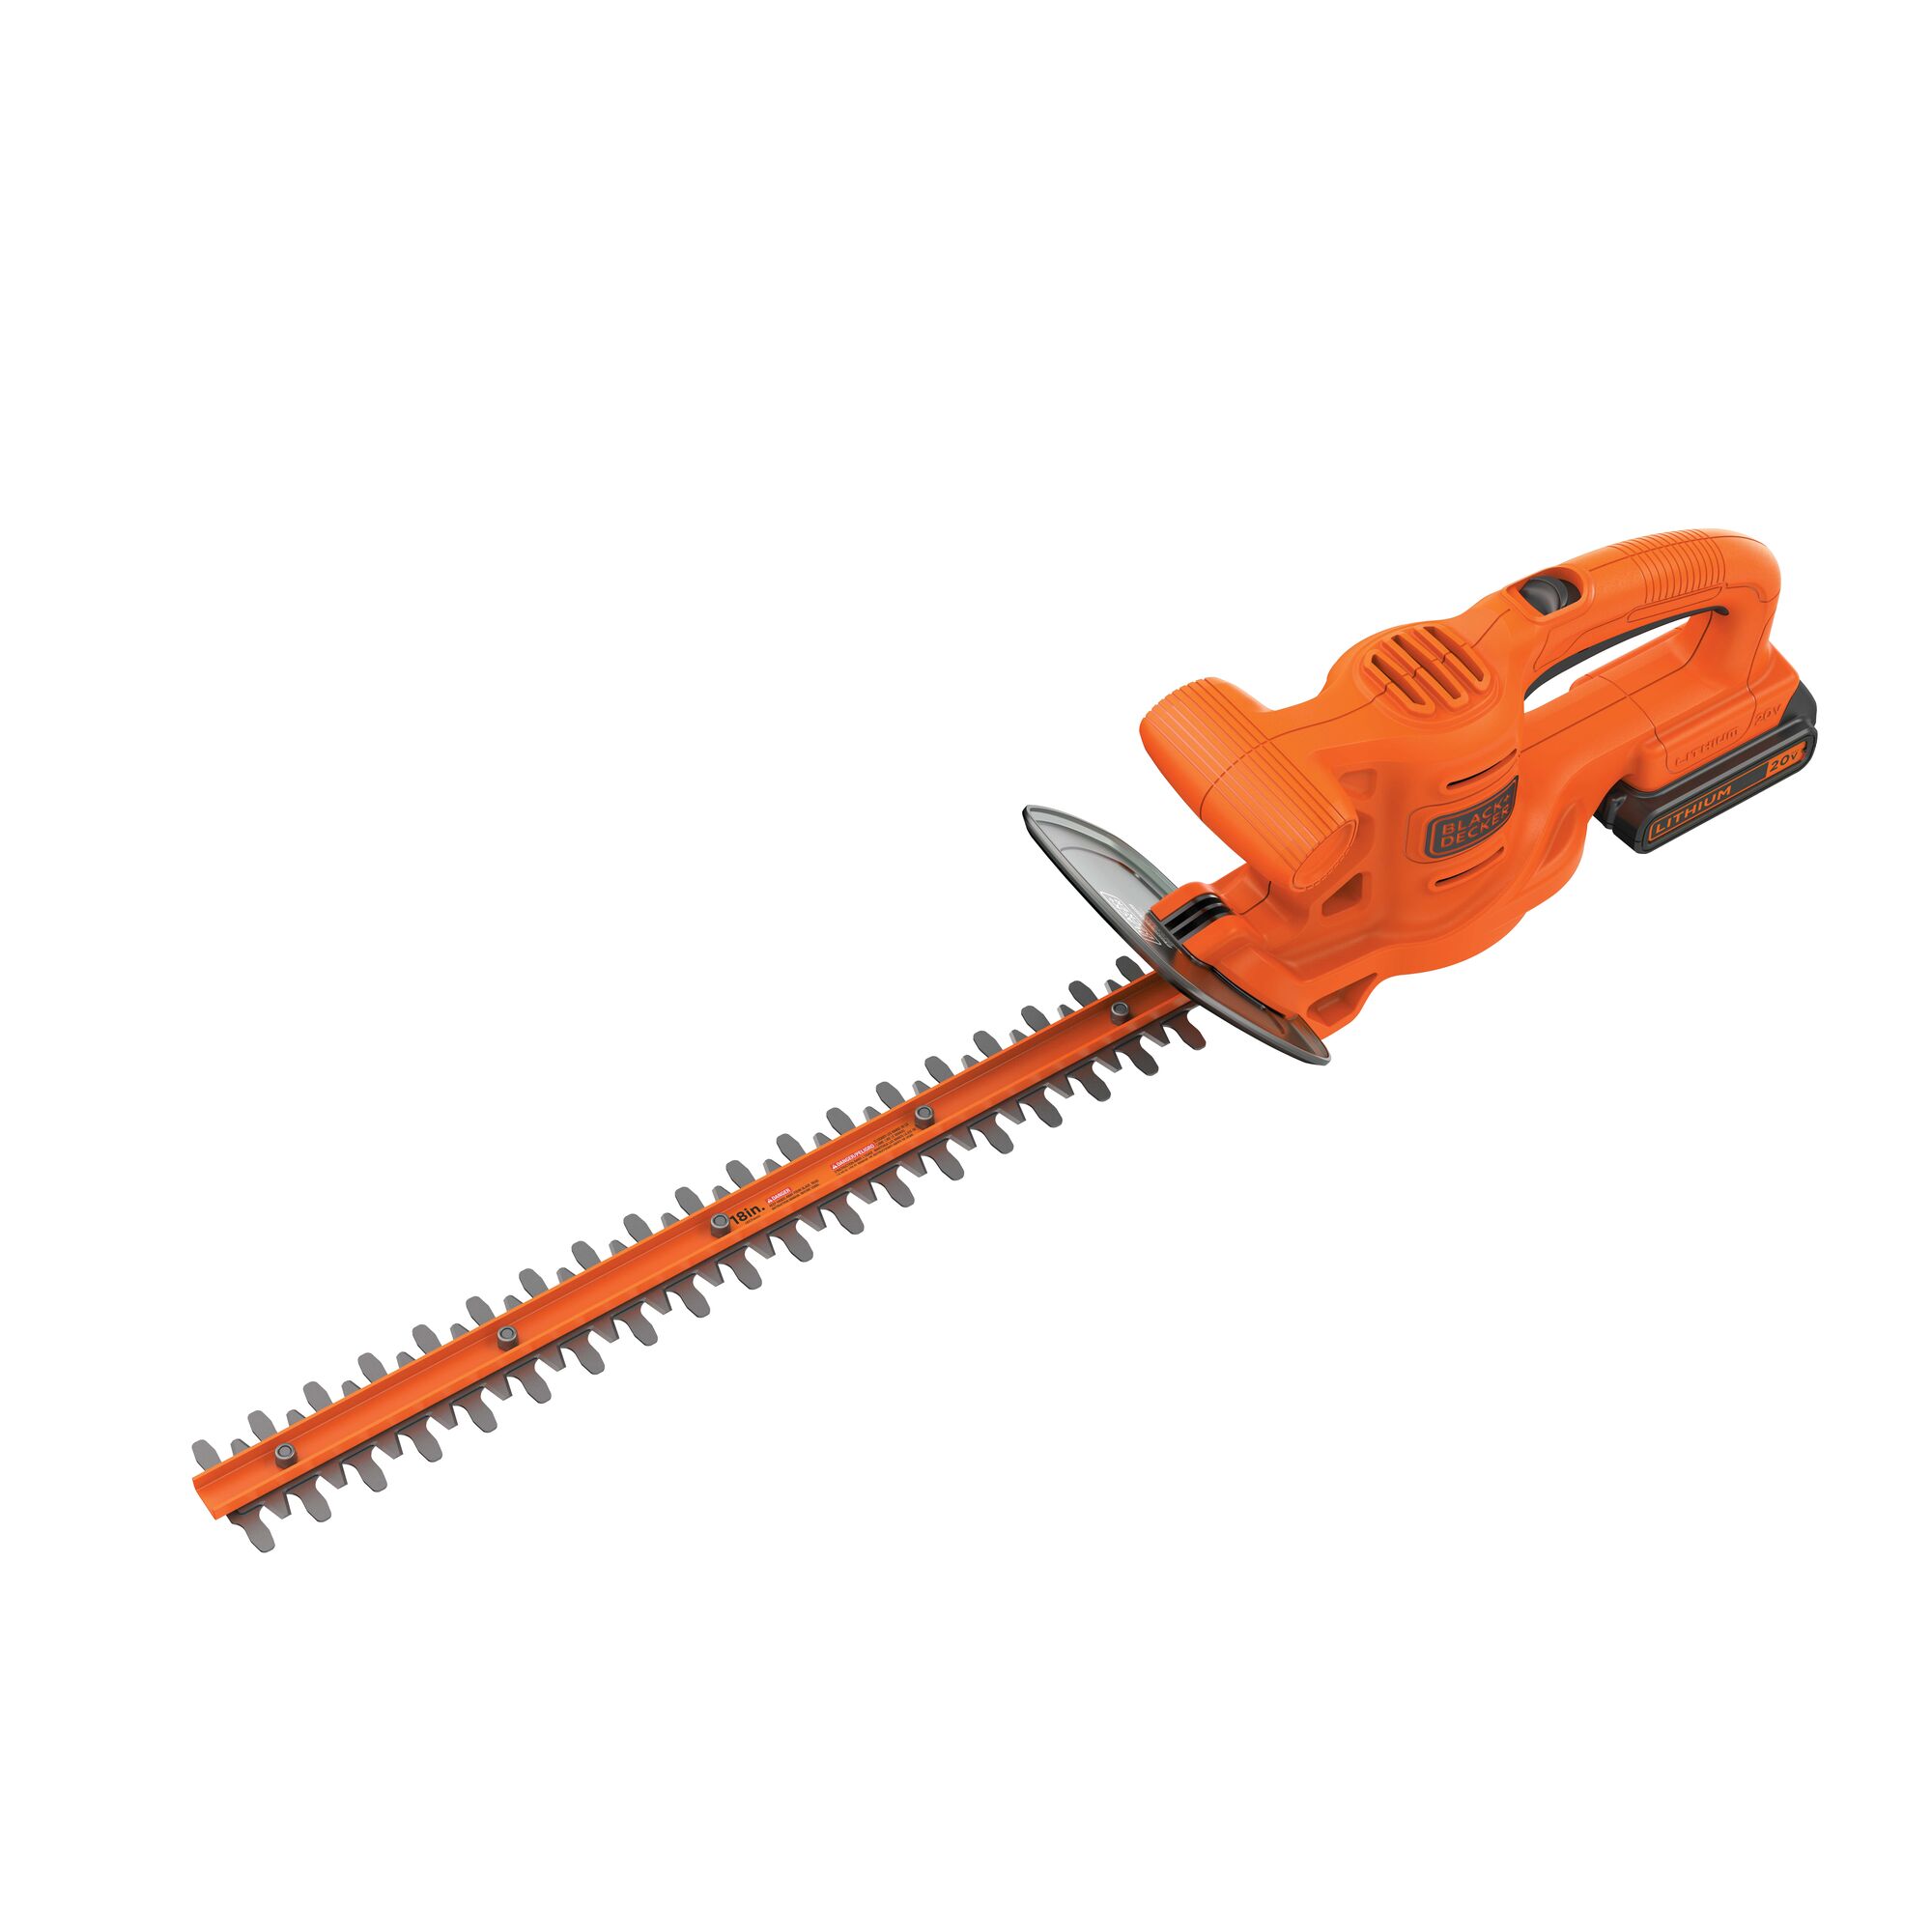 18 inch Cordless Hedge Trimmer.